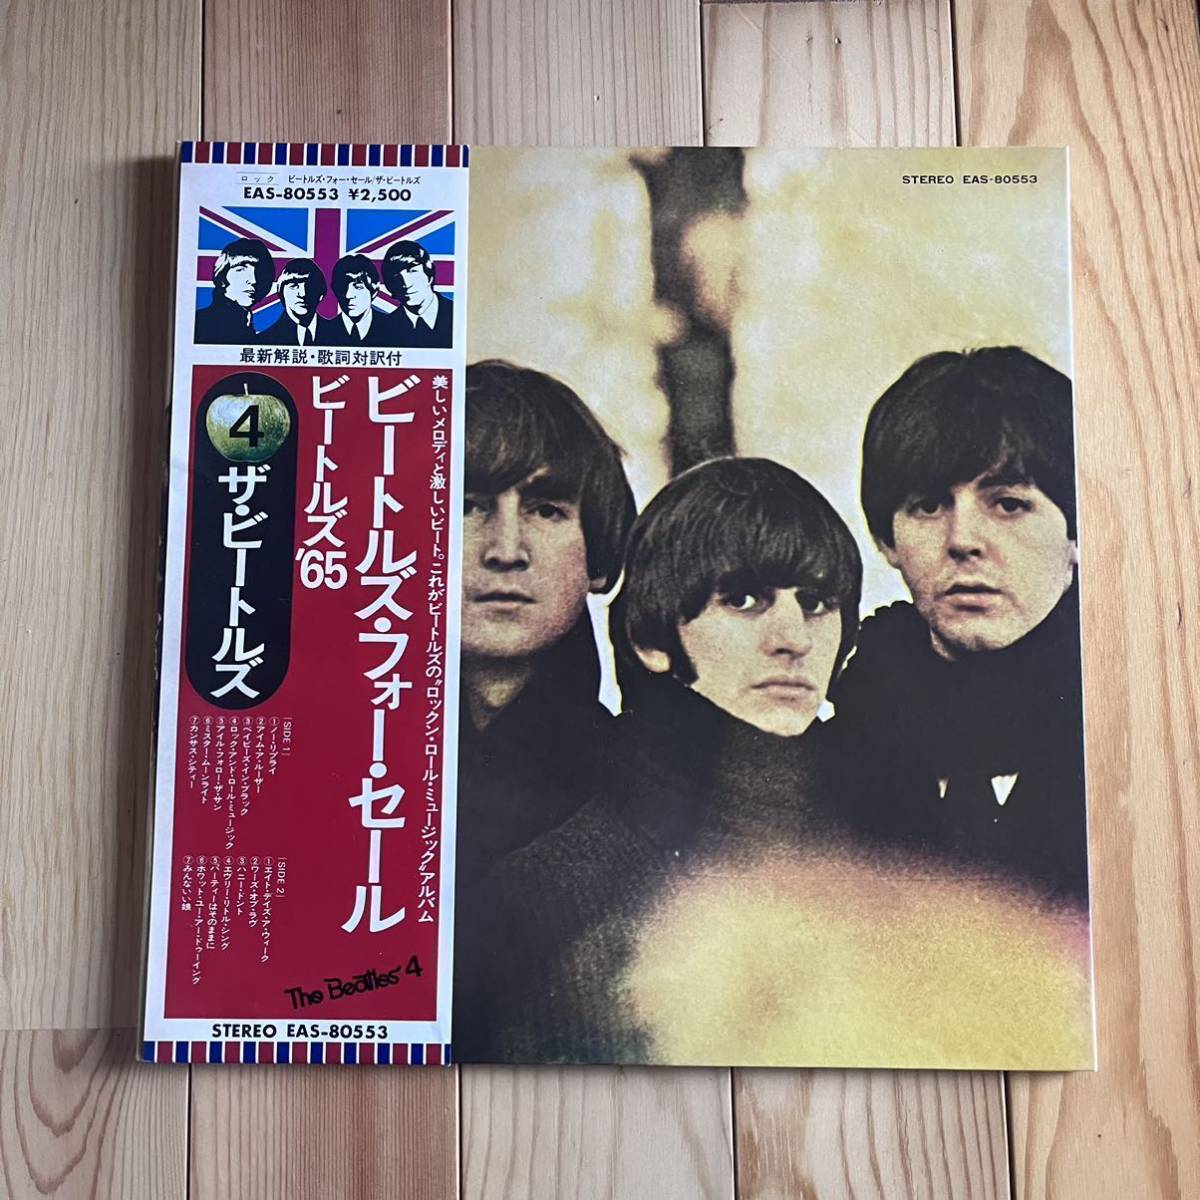  The * Beatles record The Beatles Beatles * four * sale 